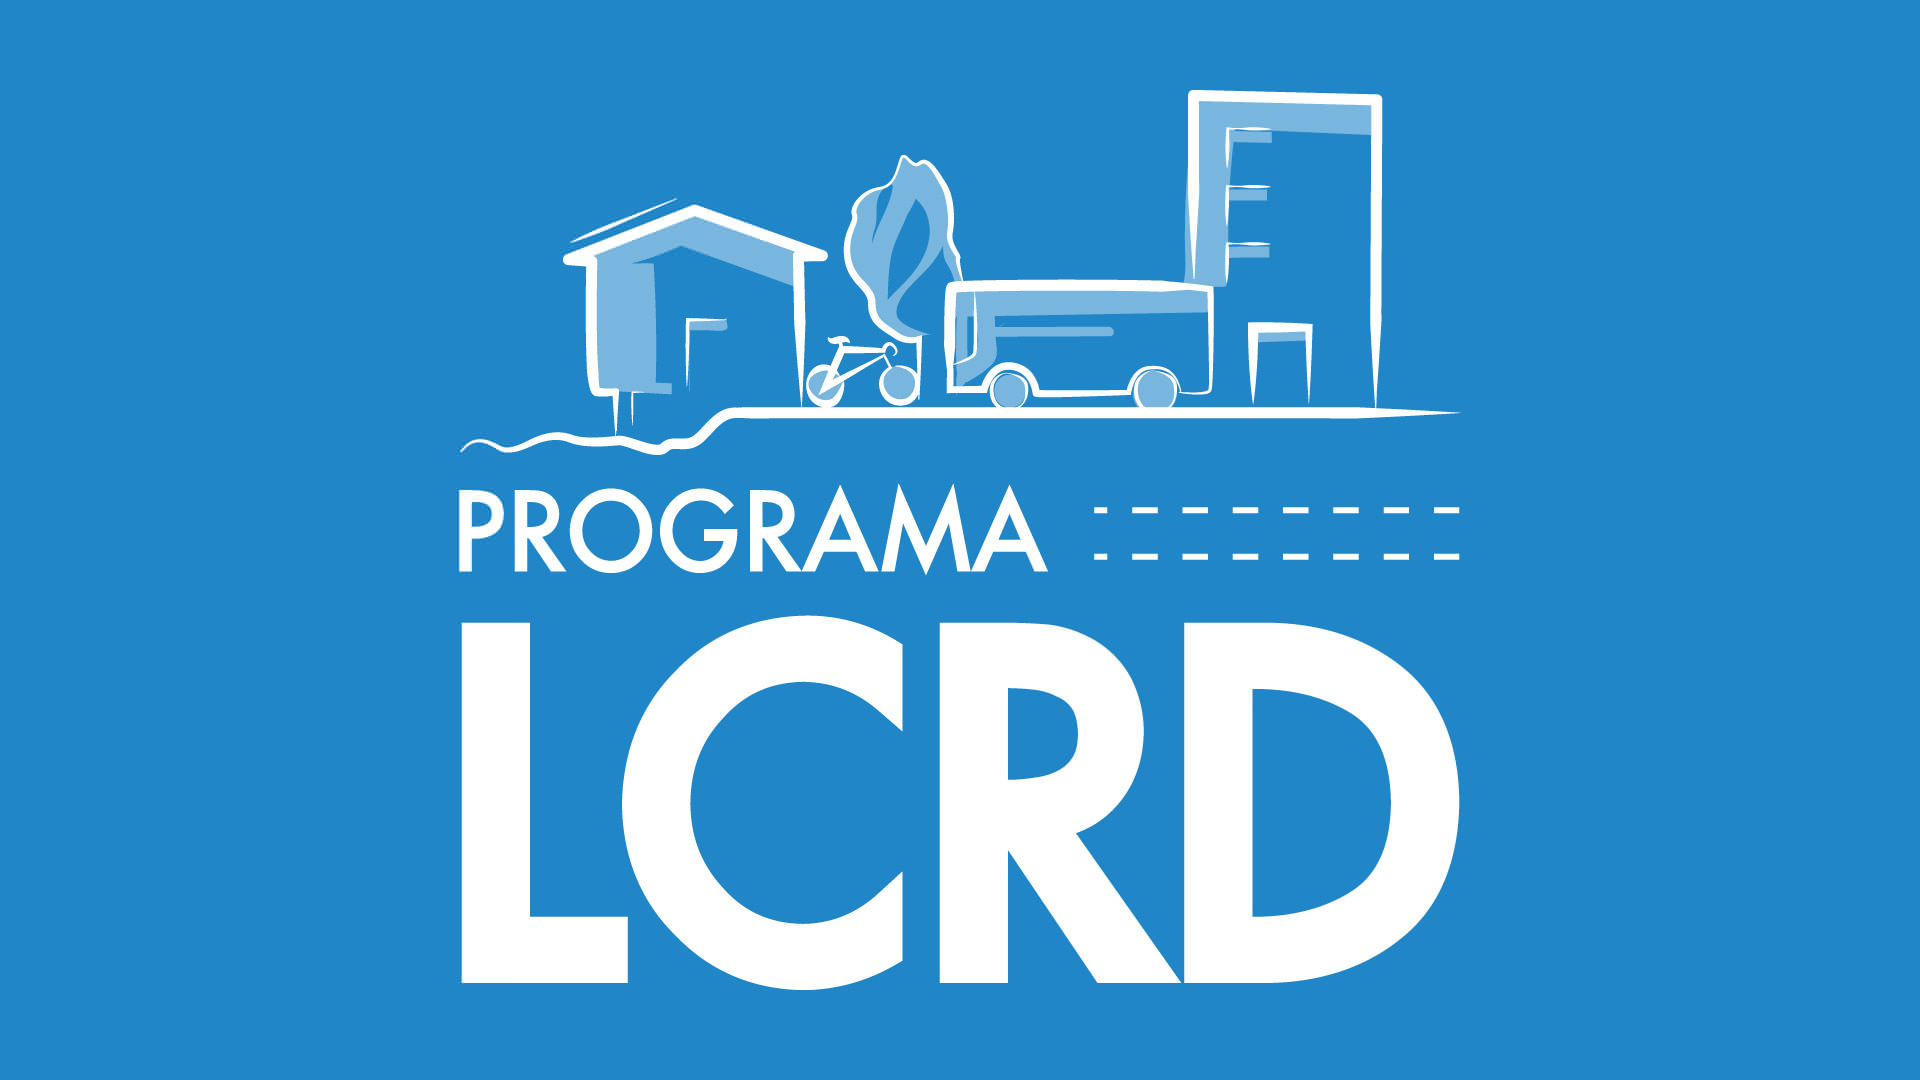 LCRD